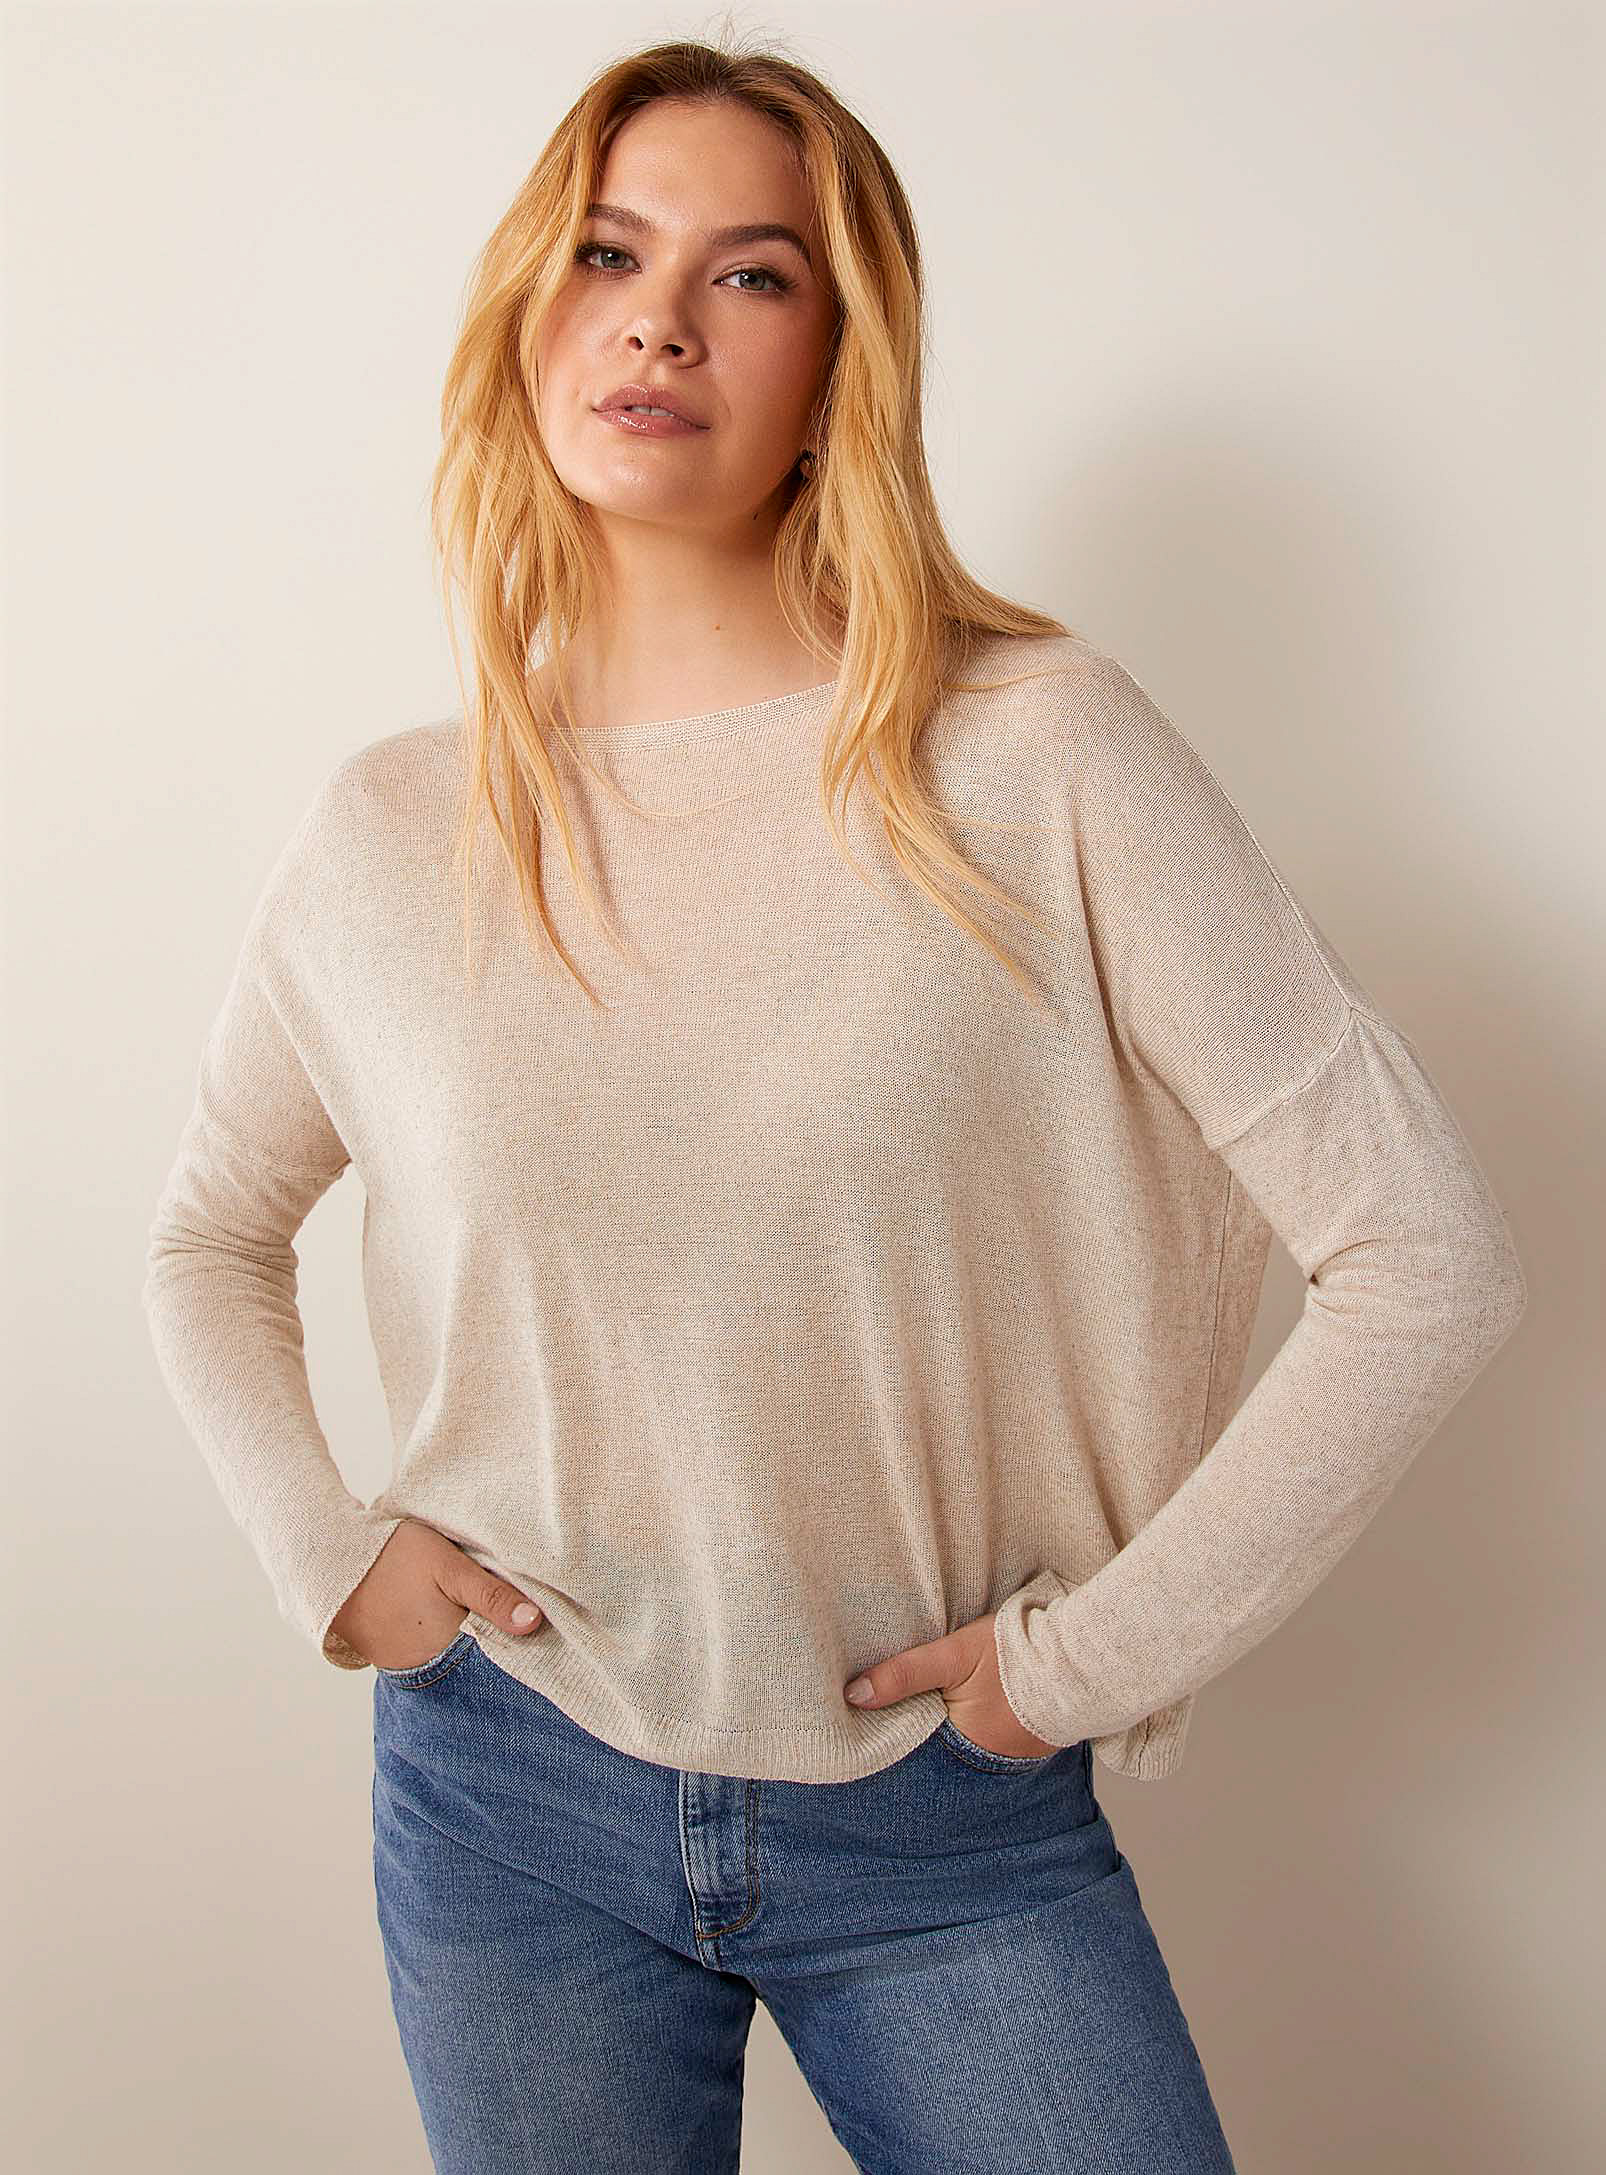 Contemporaine Loose And Flowy Boat-neck Sweater In Ecru/linen